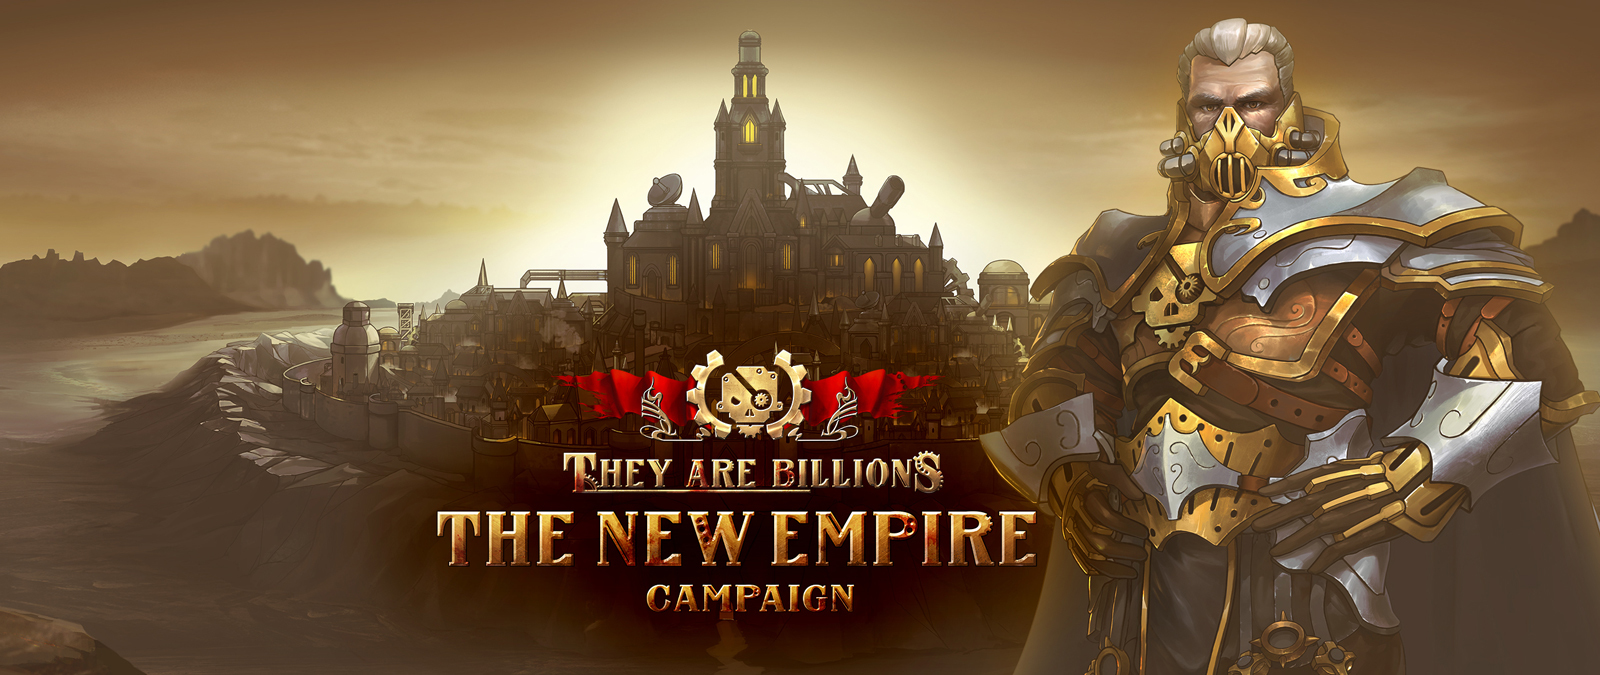 they are billions campaign